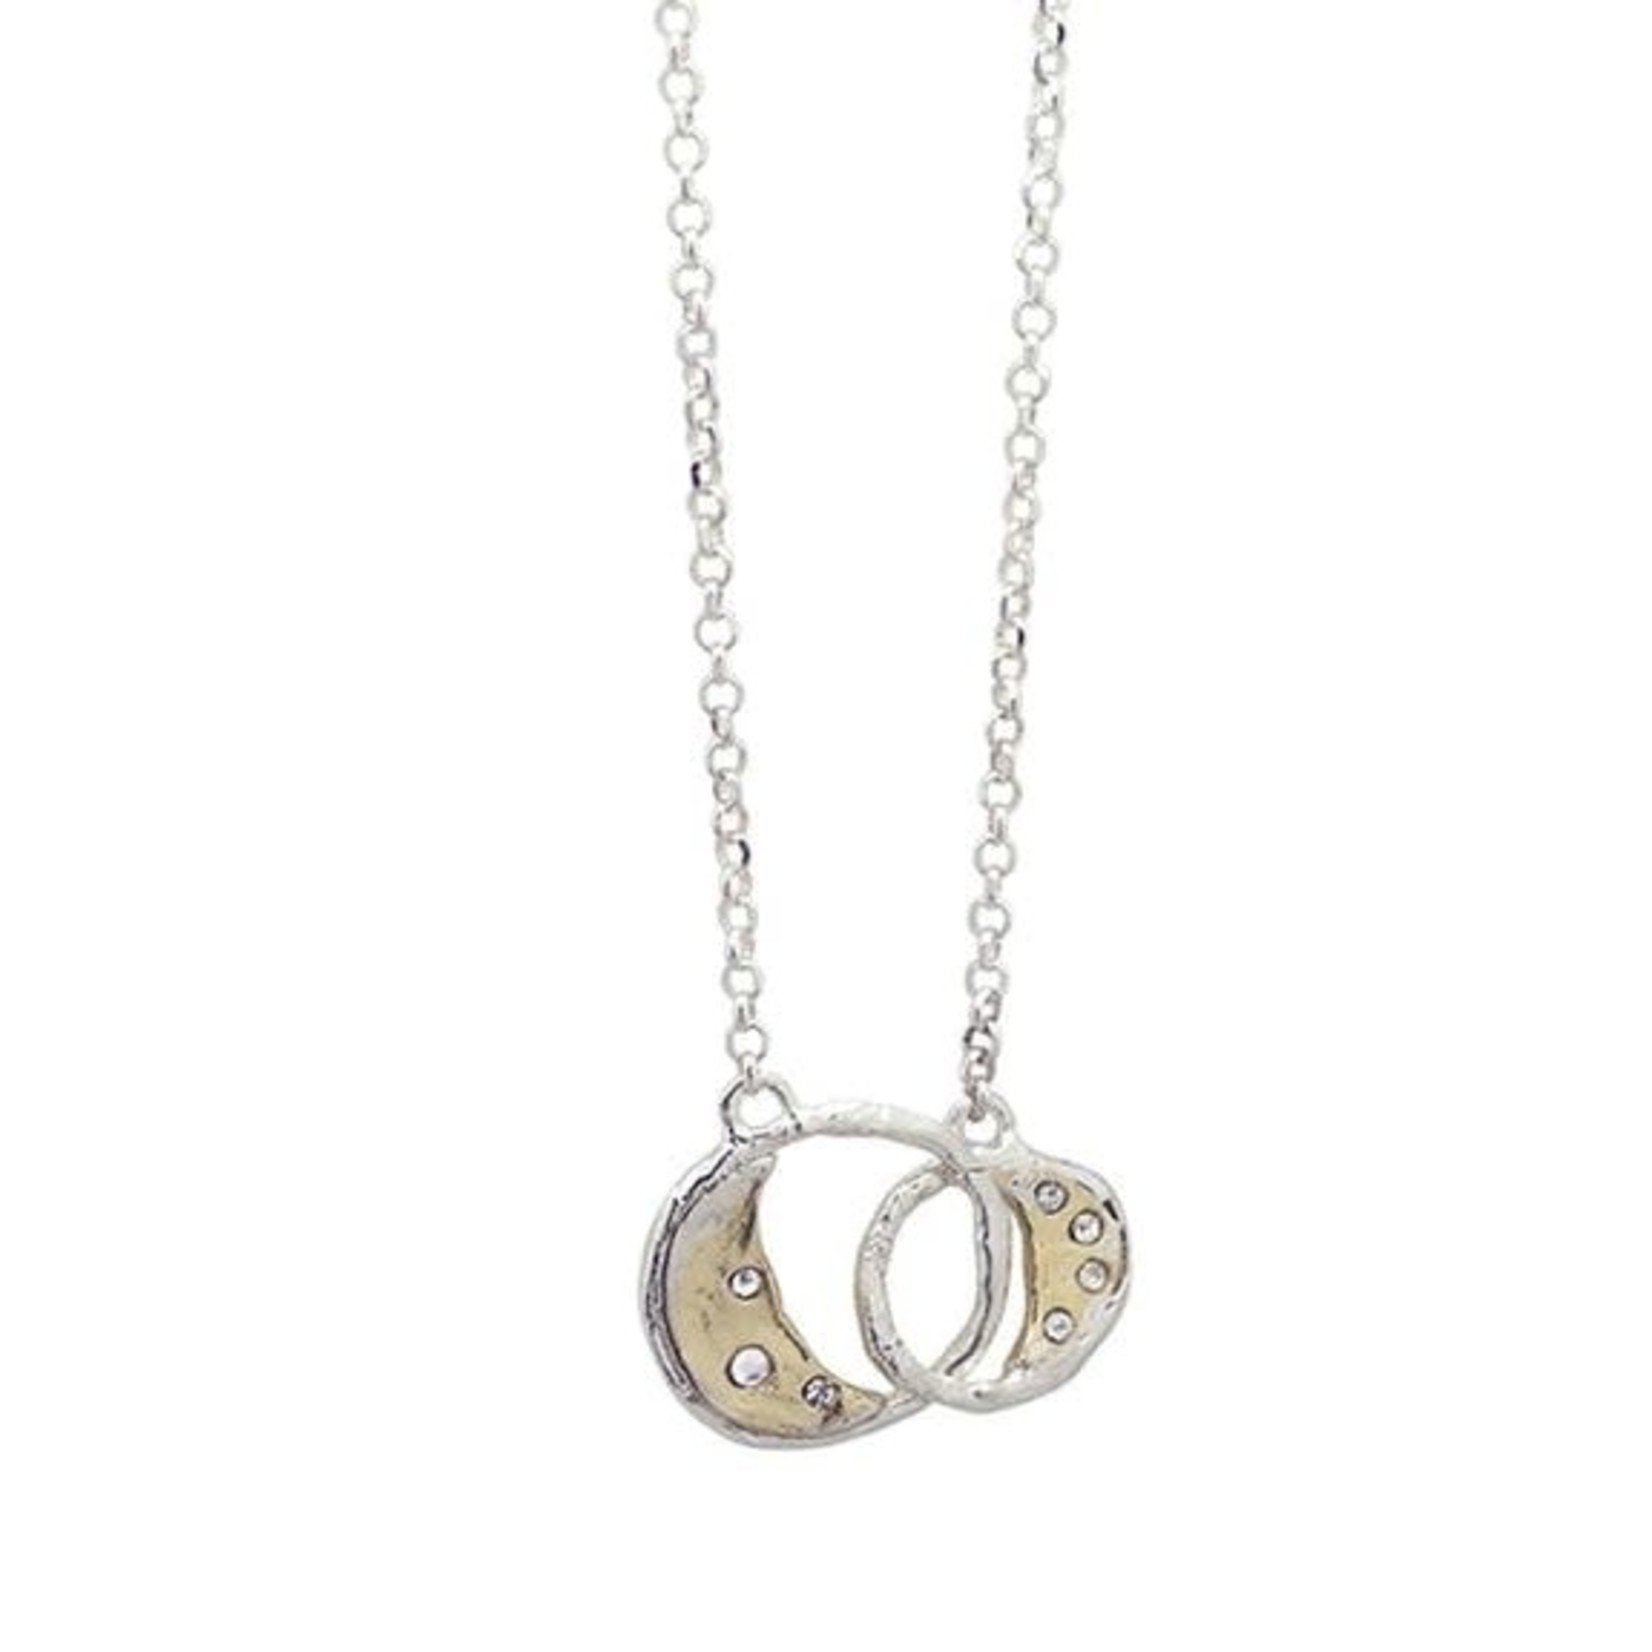 Otherworld Joined Moon Necklace - SS & Brass / 16"-18"